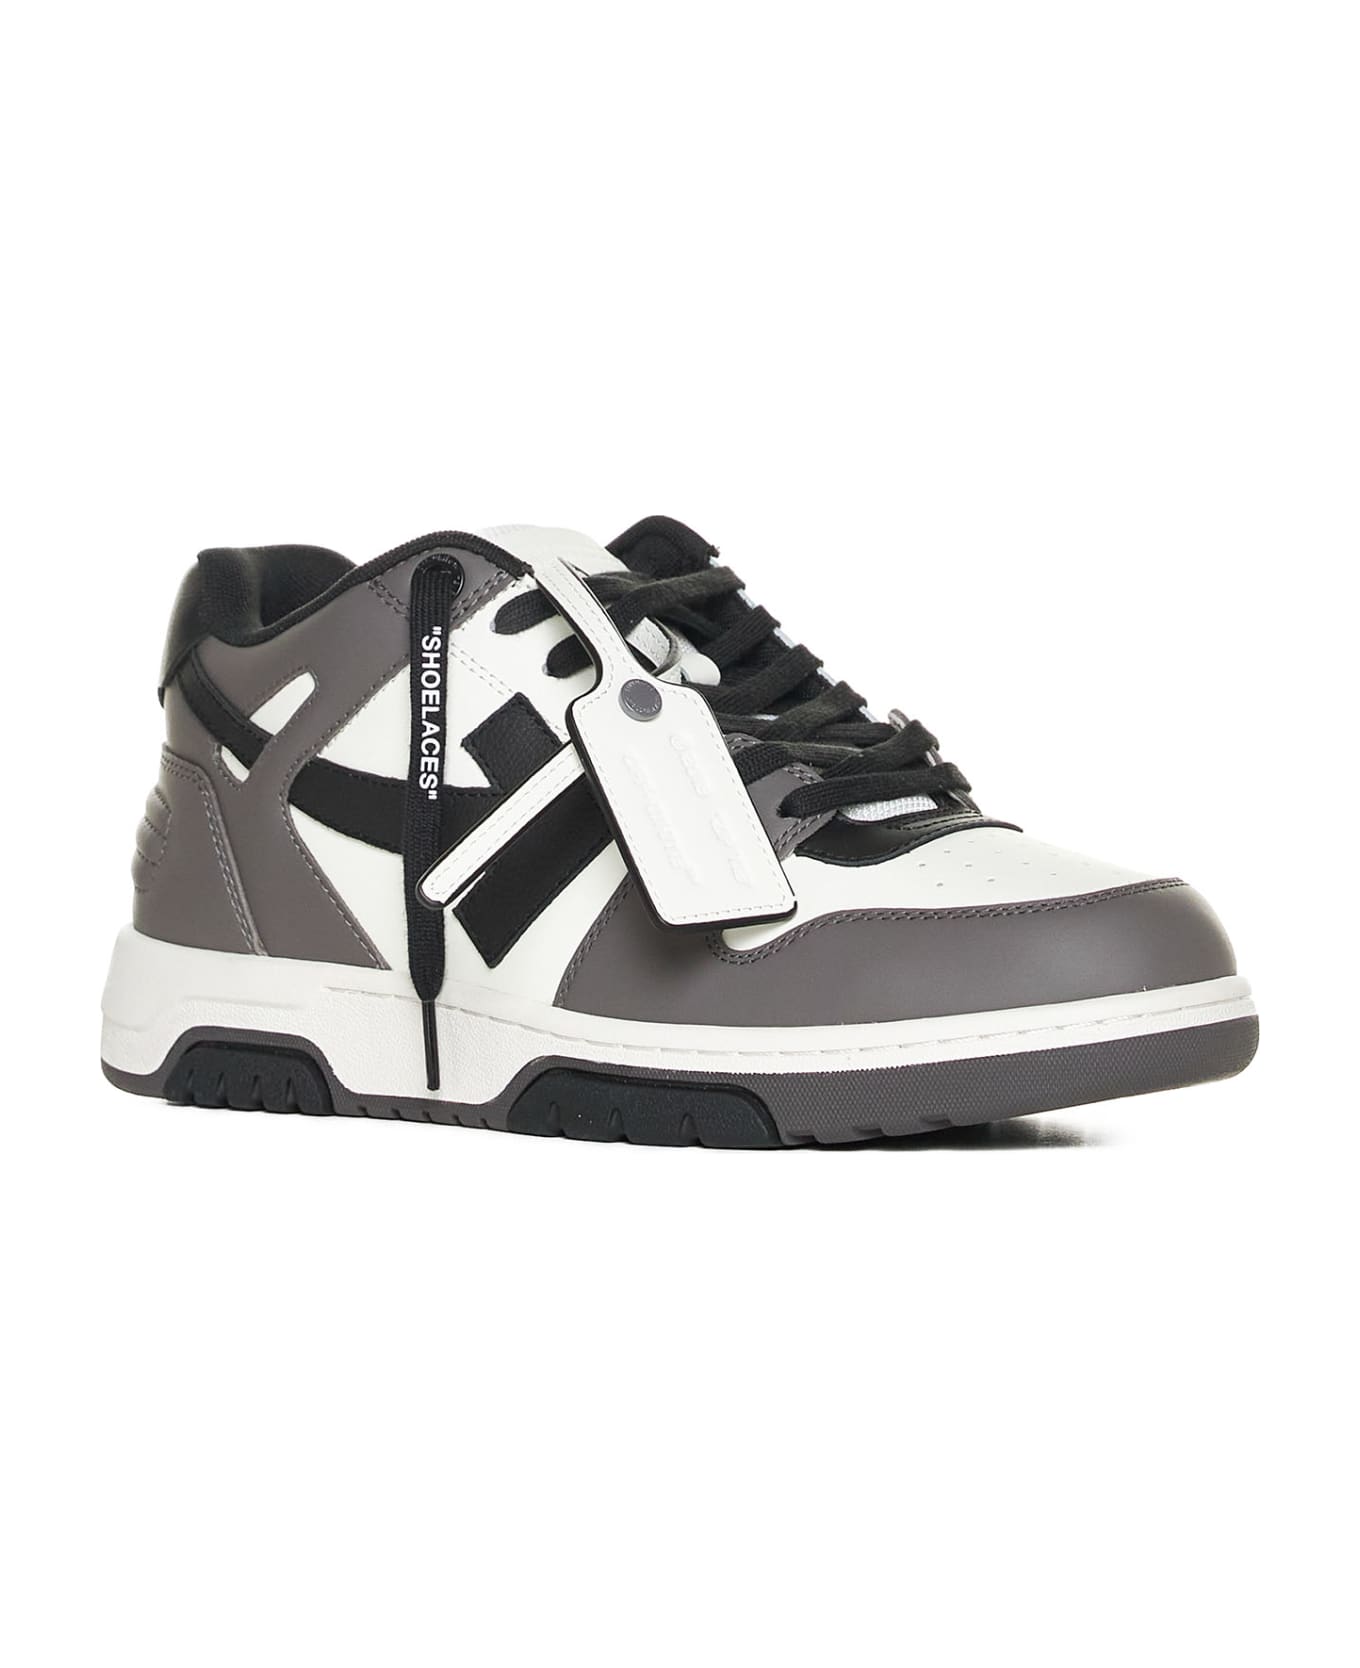 Off-White Out Of Office Low Top Sneakers - Dark grey black スニーカー